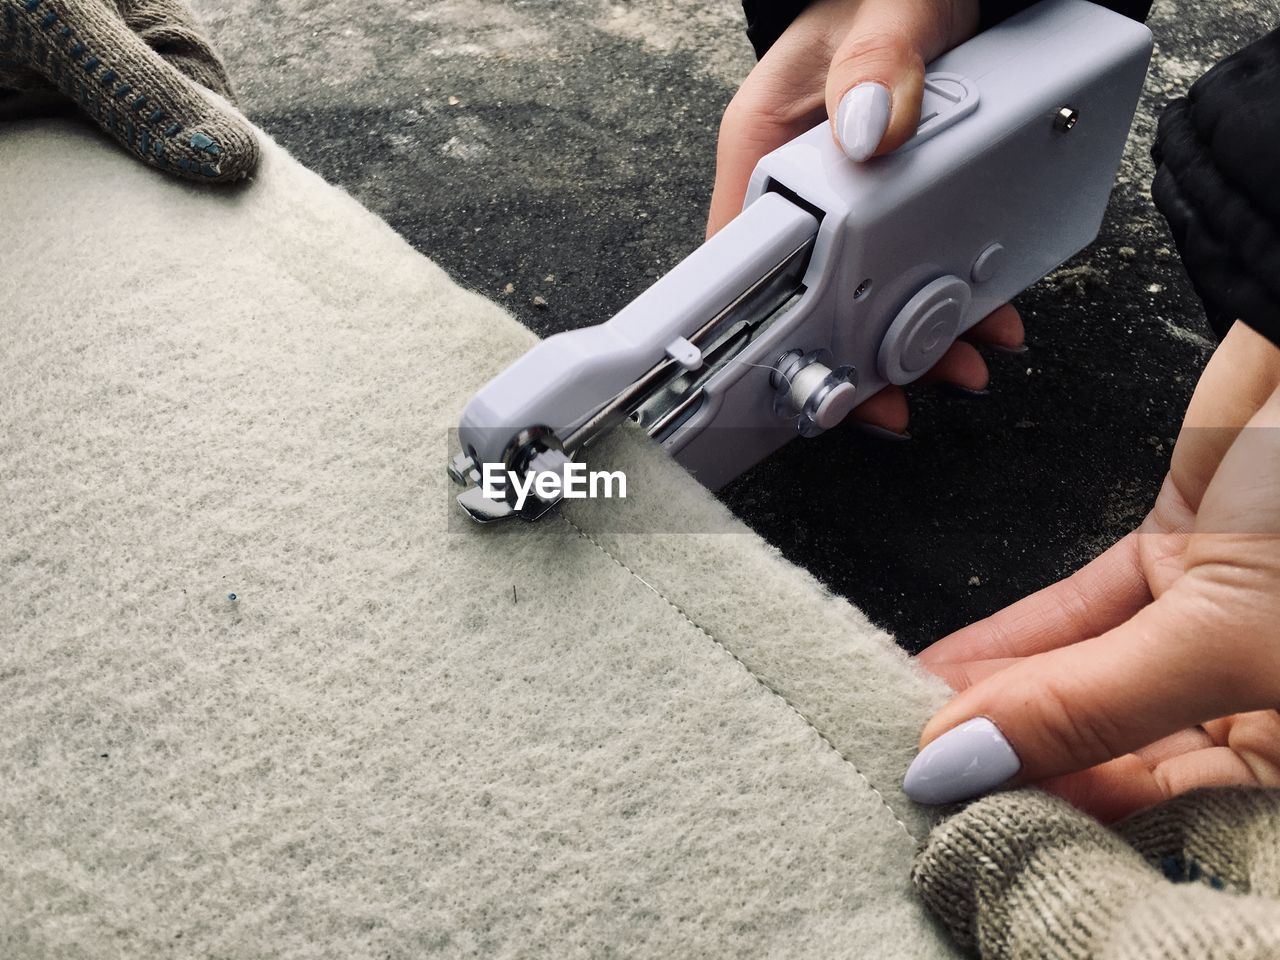 Cropped image of woman sewing carpet